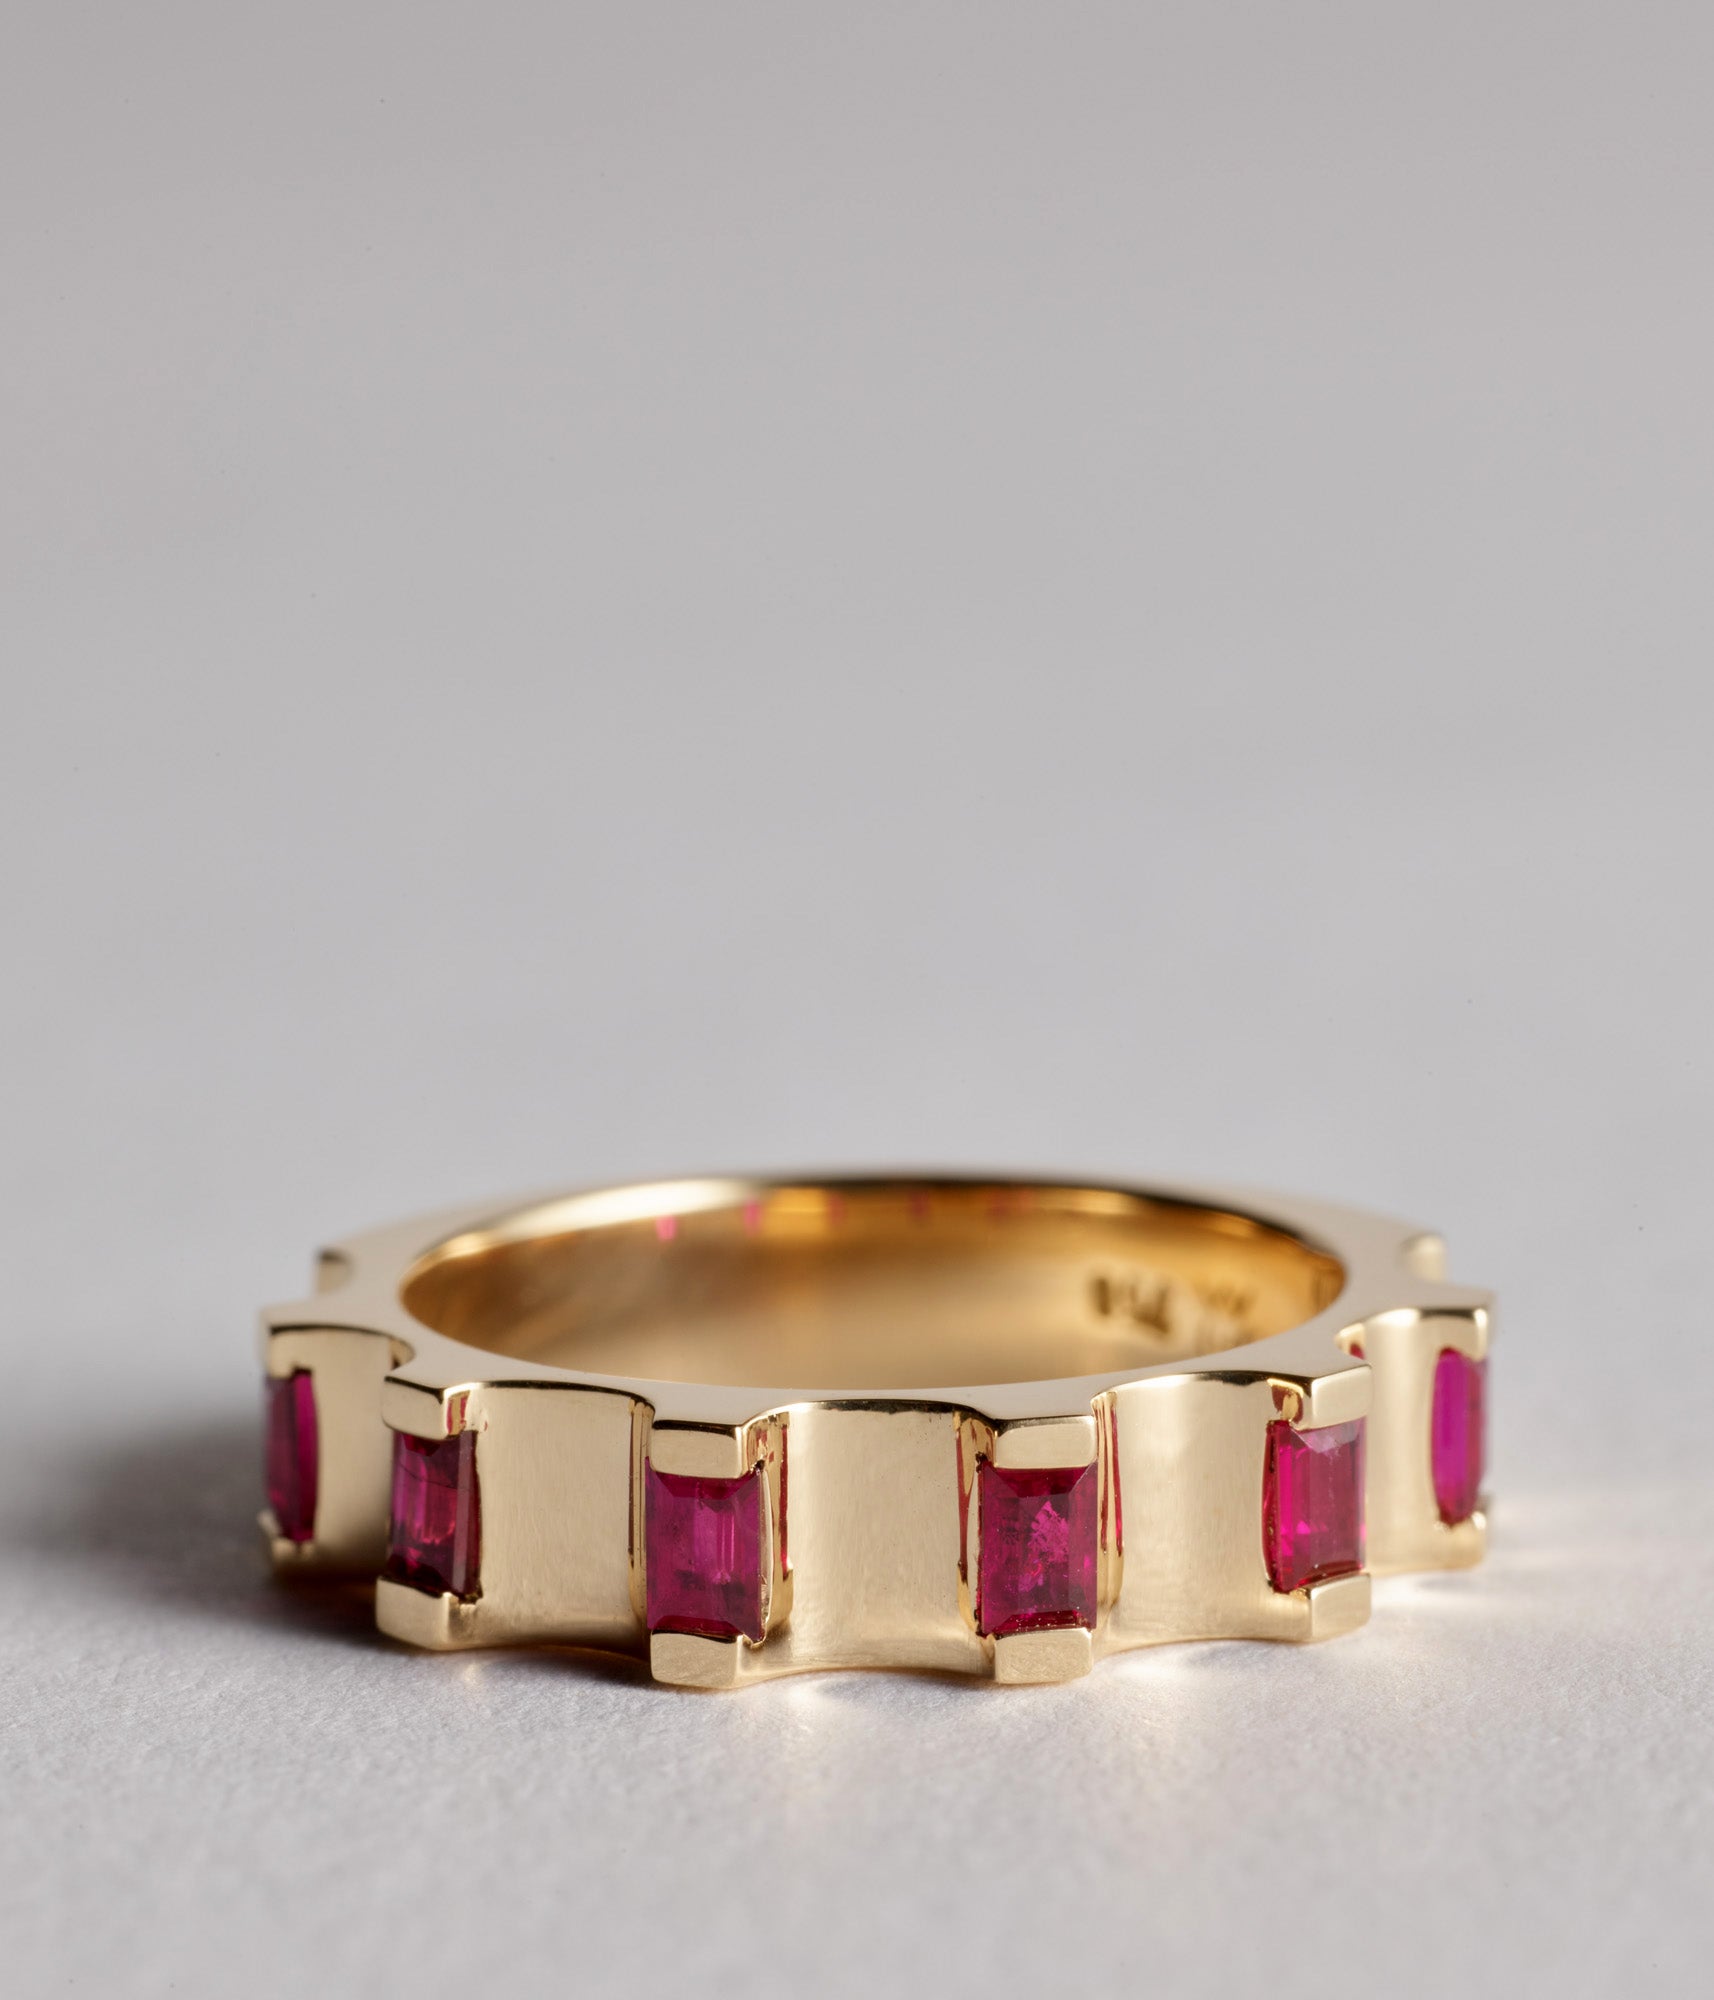 Parmentier Ring - Rubies